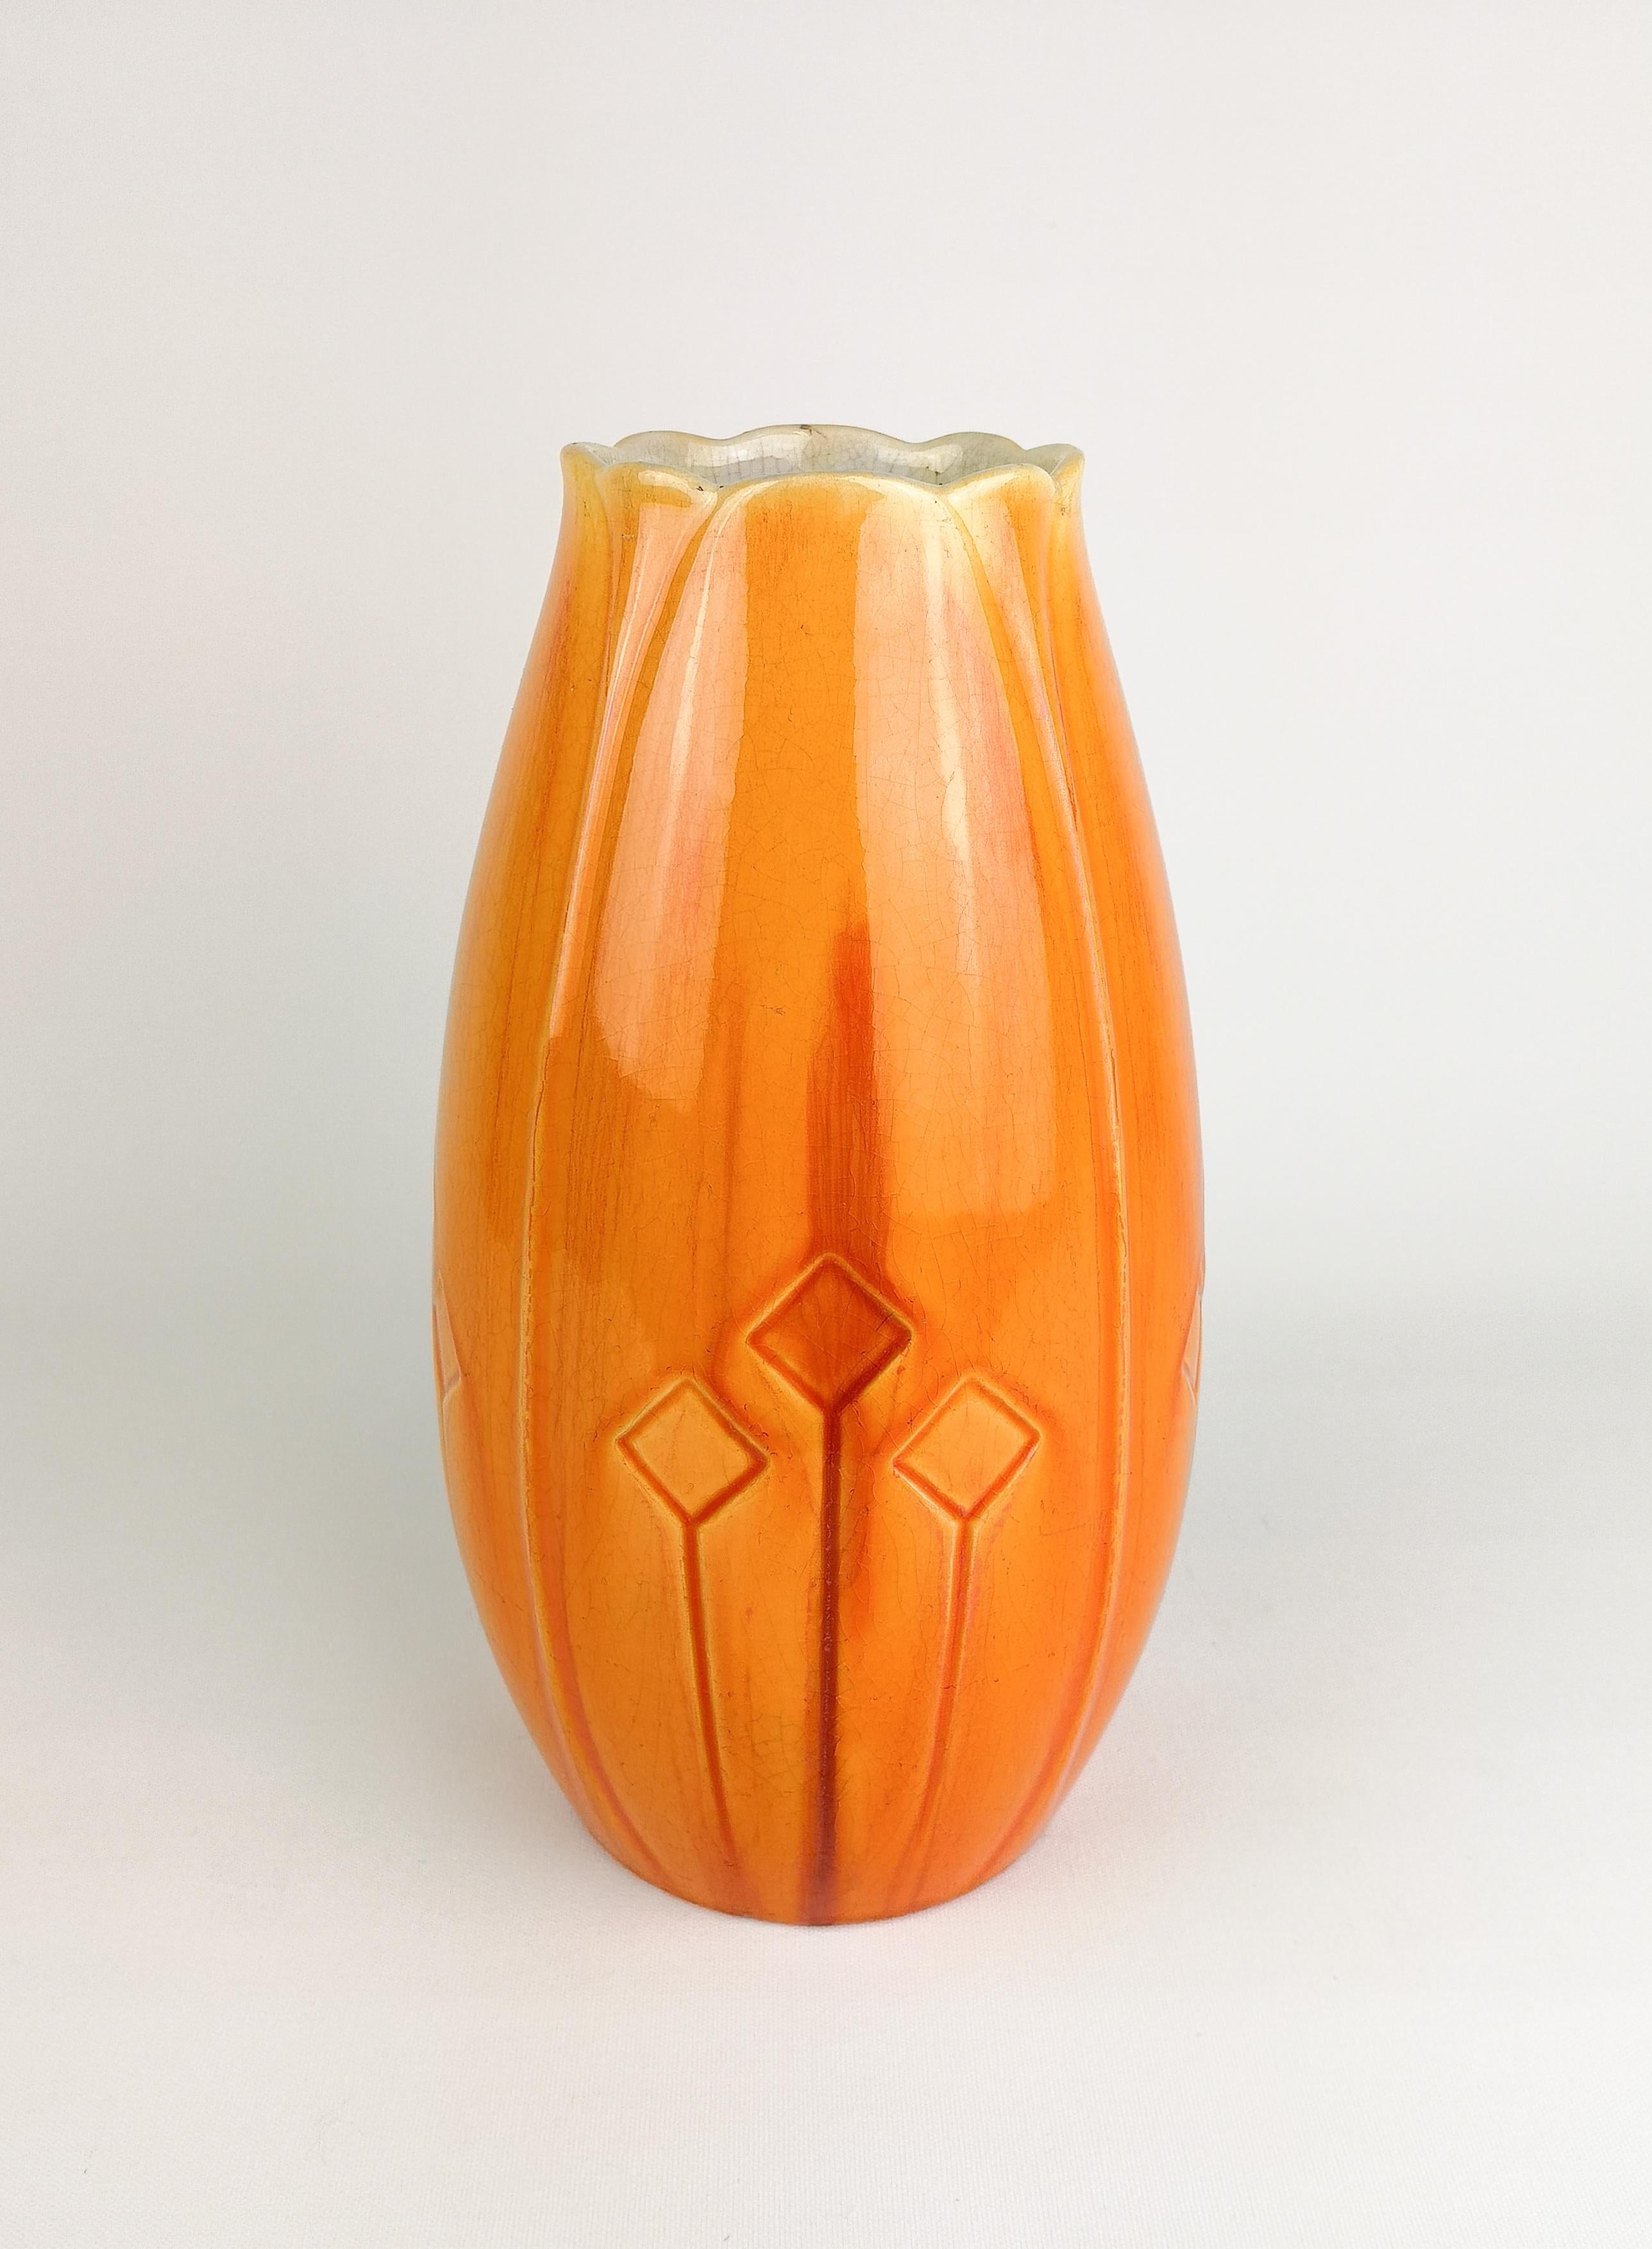 Nicely glazed Art Nouveau vase designed by Alf Wallander for Rörstrand Sweden. The glaze has a wonderful red/orange shine. The vase have some distress marks allaround from its age.